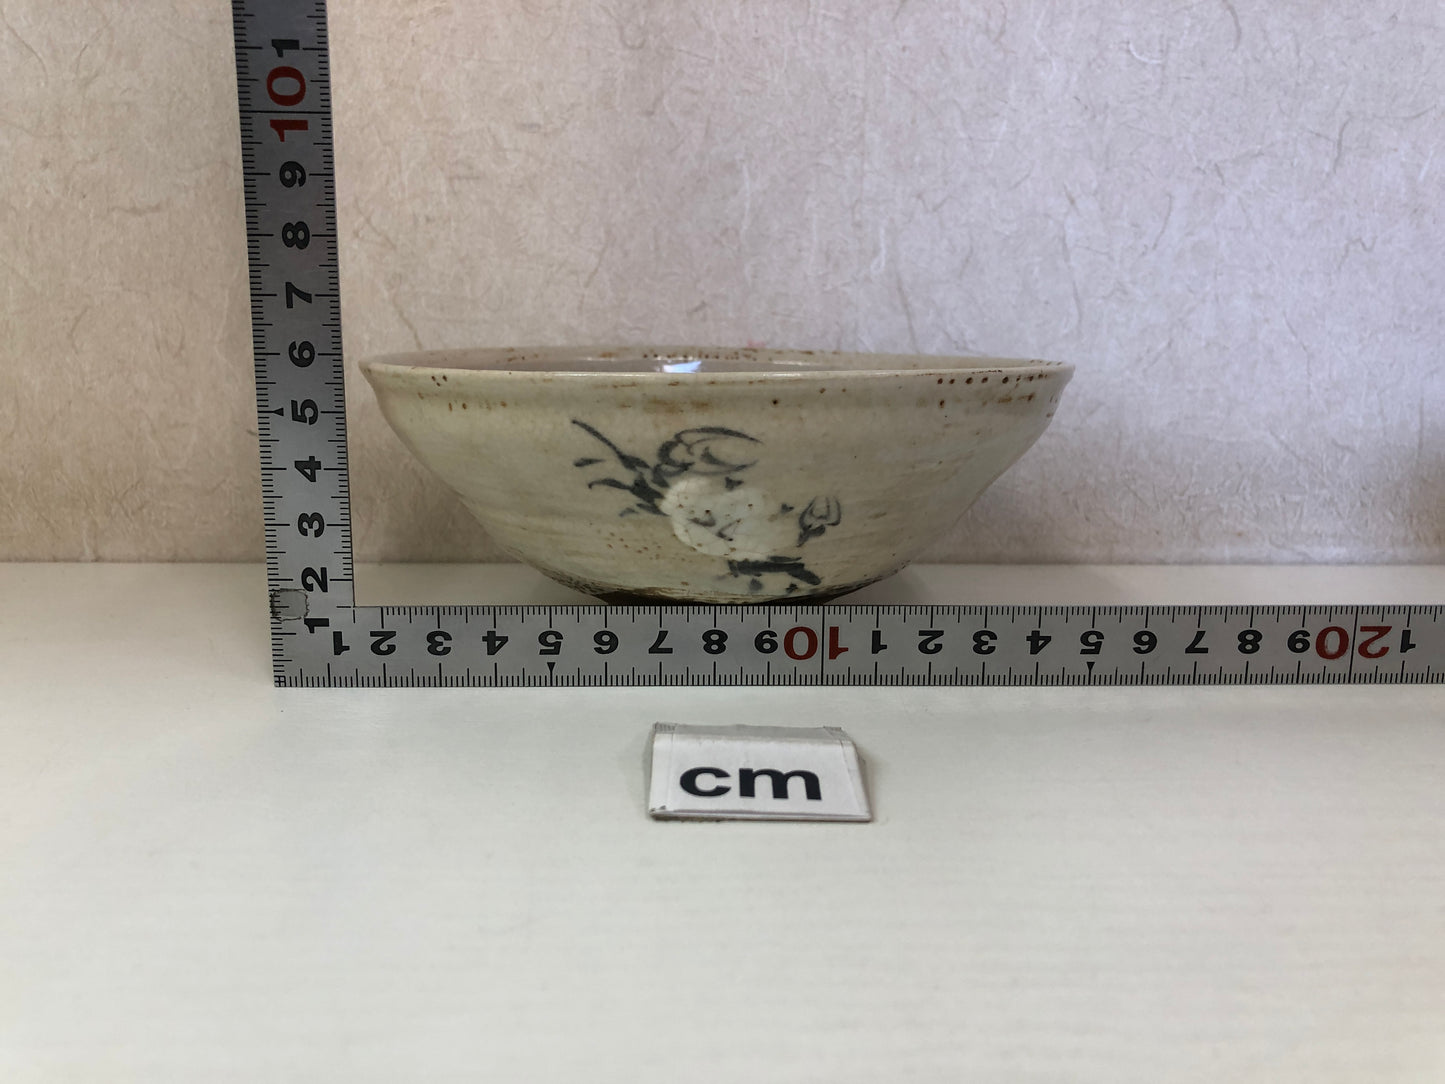 Y4469 CHAWAN Mino-ware signed flat bowl crab Japan antique tea ceremony pottery